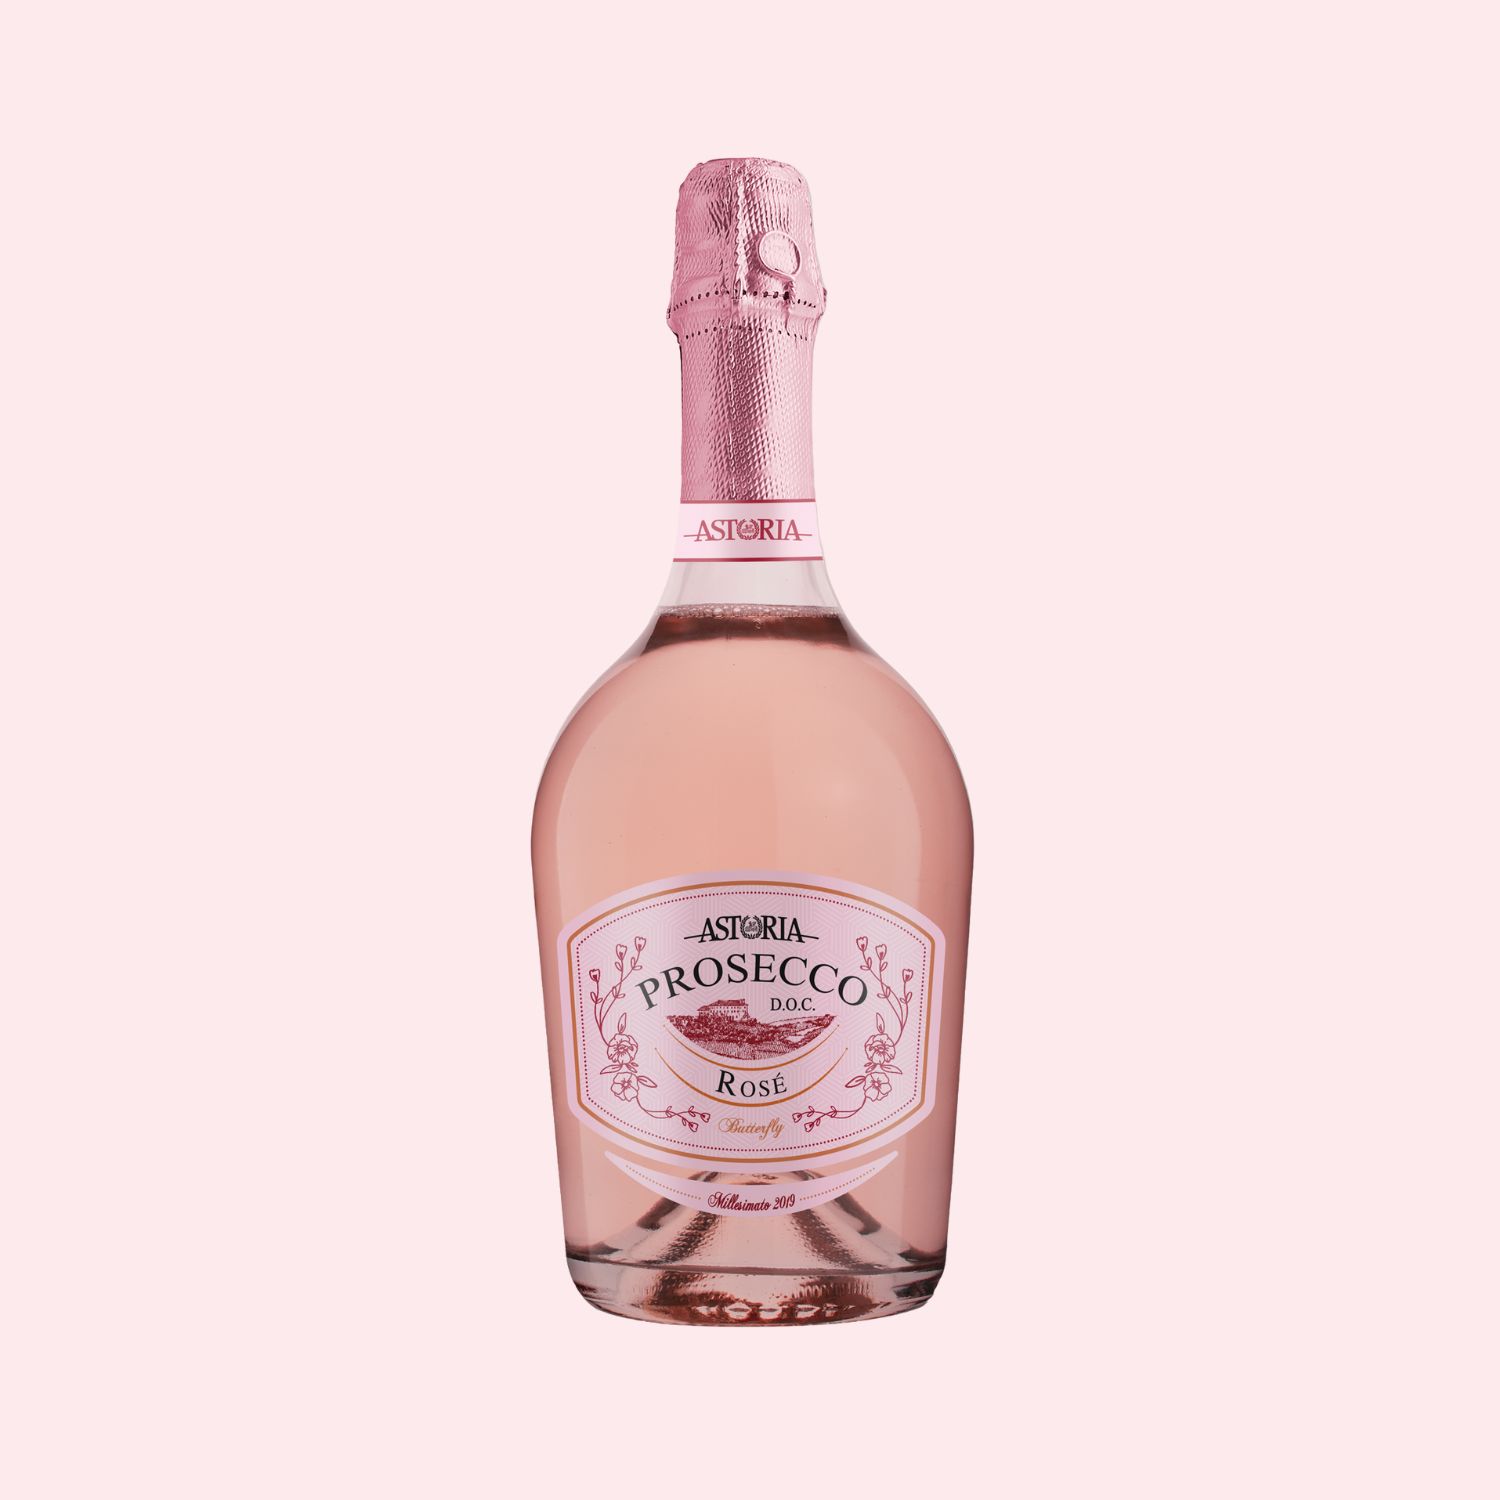 ASTORIA BUTTERFLY 'EXTRA DRY' ROSÉ, PROSECCO D.O.C.-Ambrosia Daily